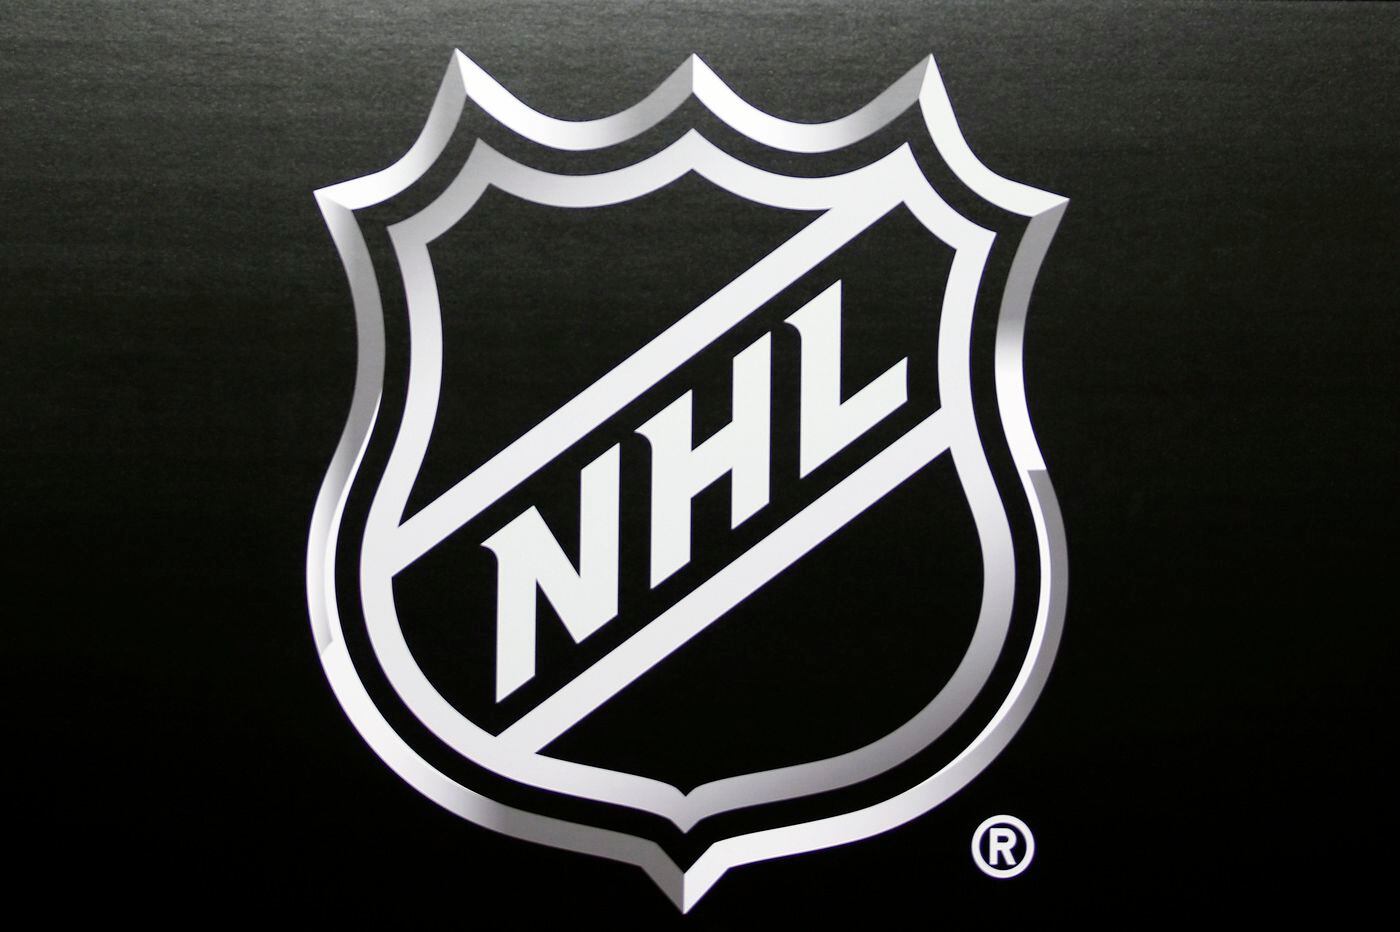 Nhl Says 26 Players Test Positive For Covid 19 On The Fly